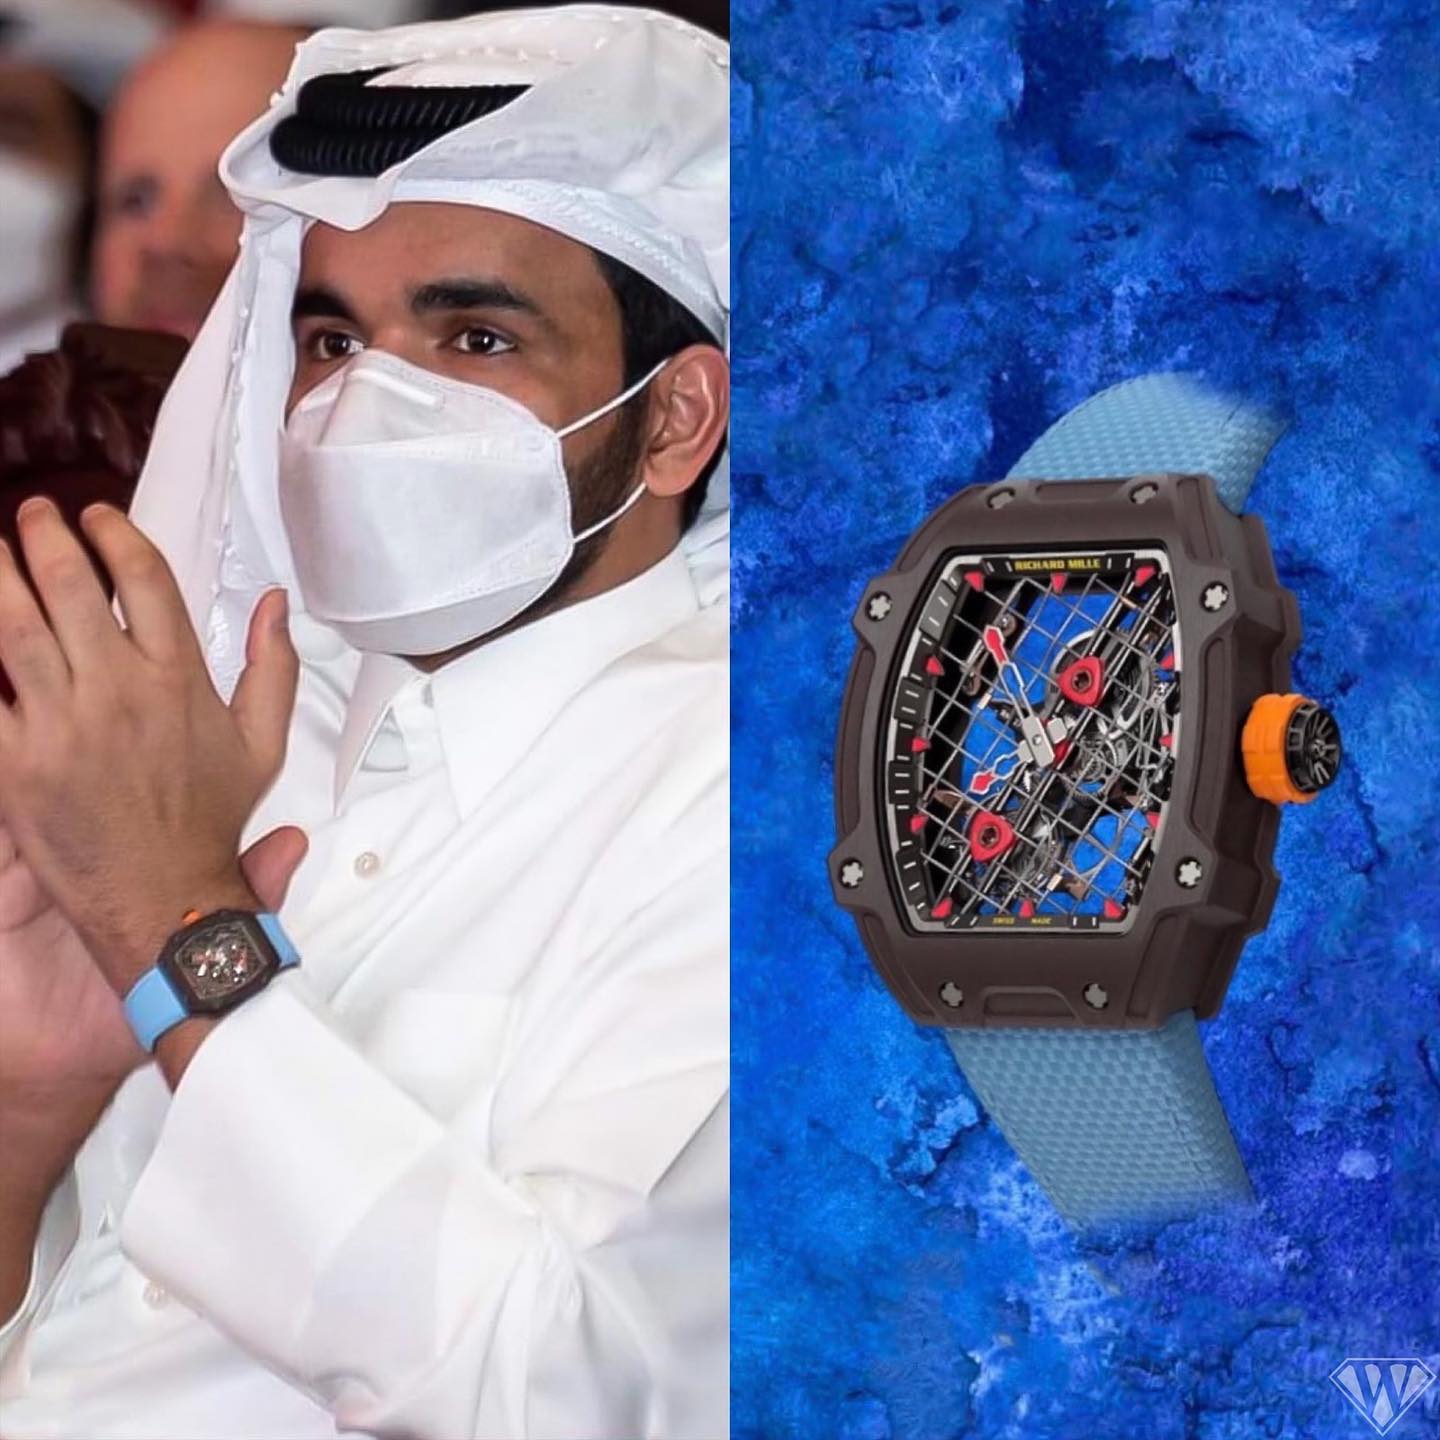 Unique collaboration between Richard Mille and tennis player Rafa